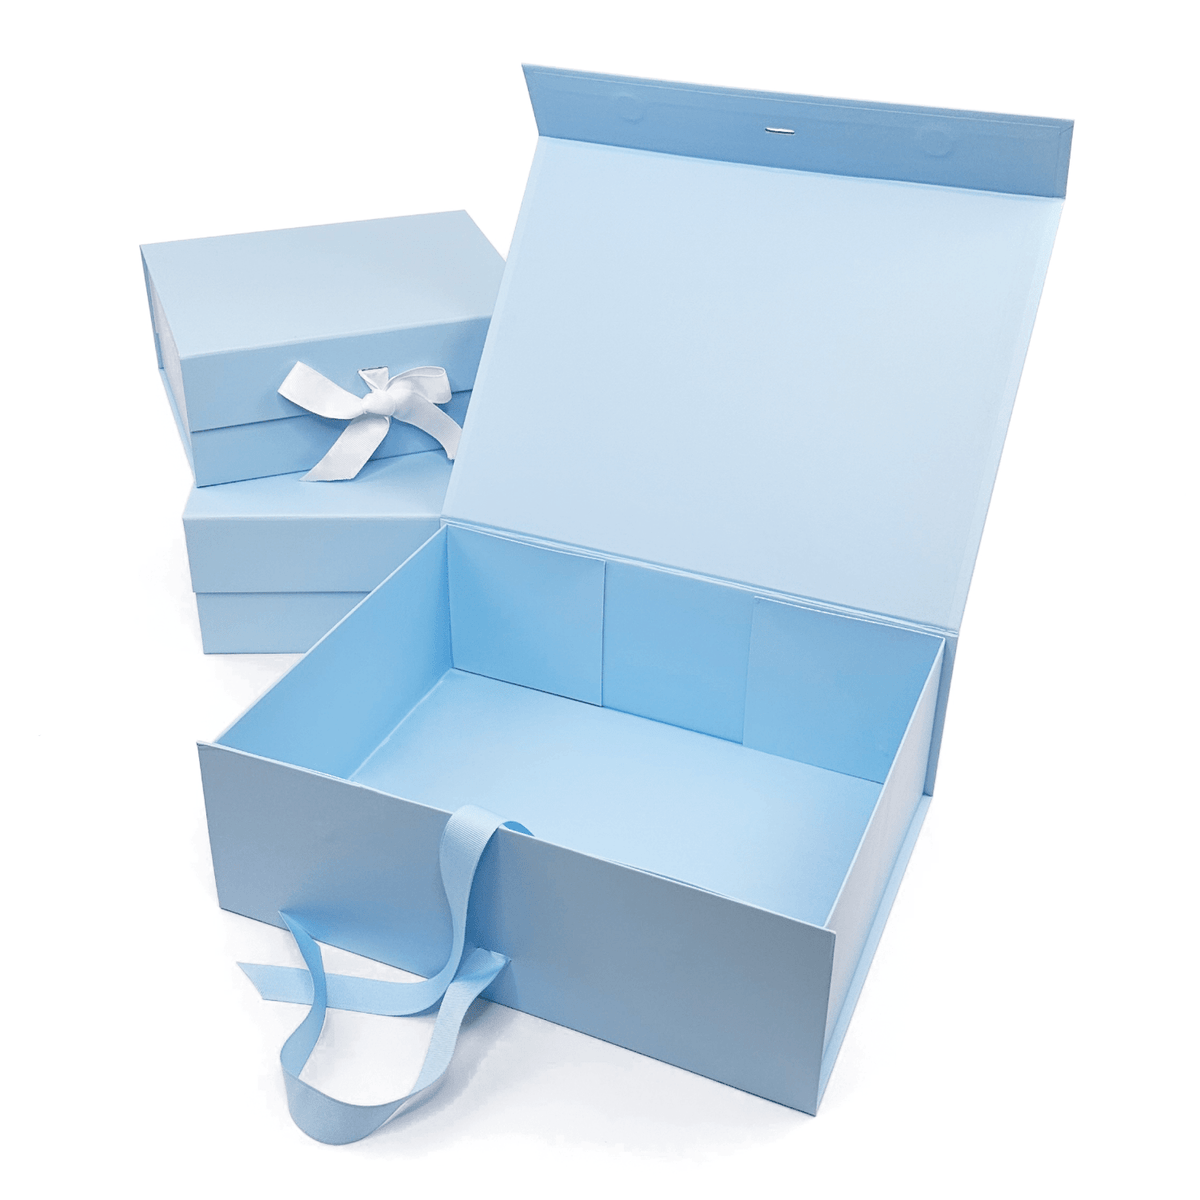 Recycled A4 Cardboard Folder Document File - Buy Promotional Products UK, Branded Merchandise, Corporate Gifts